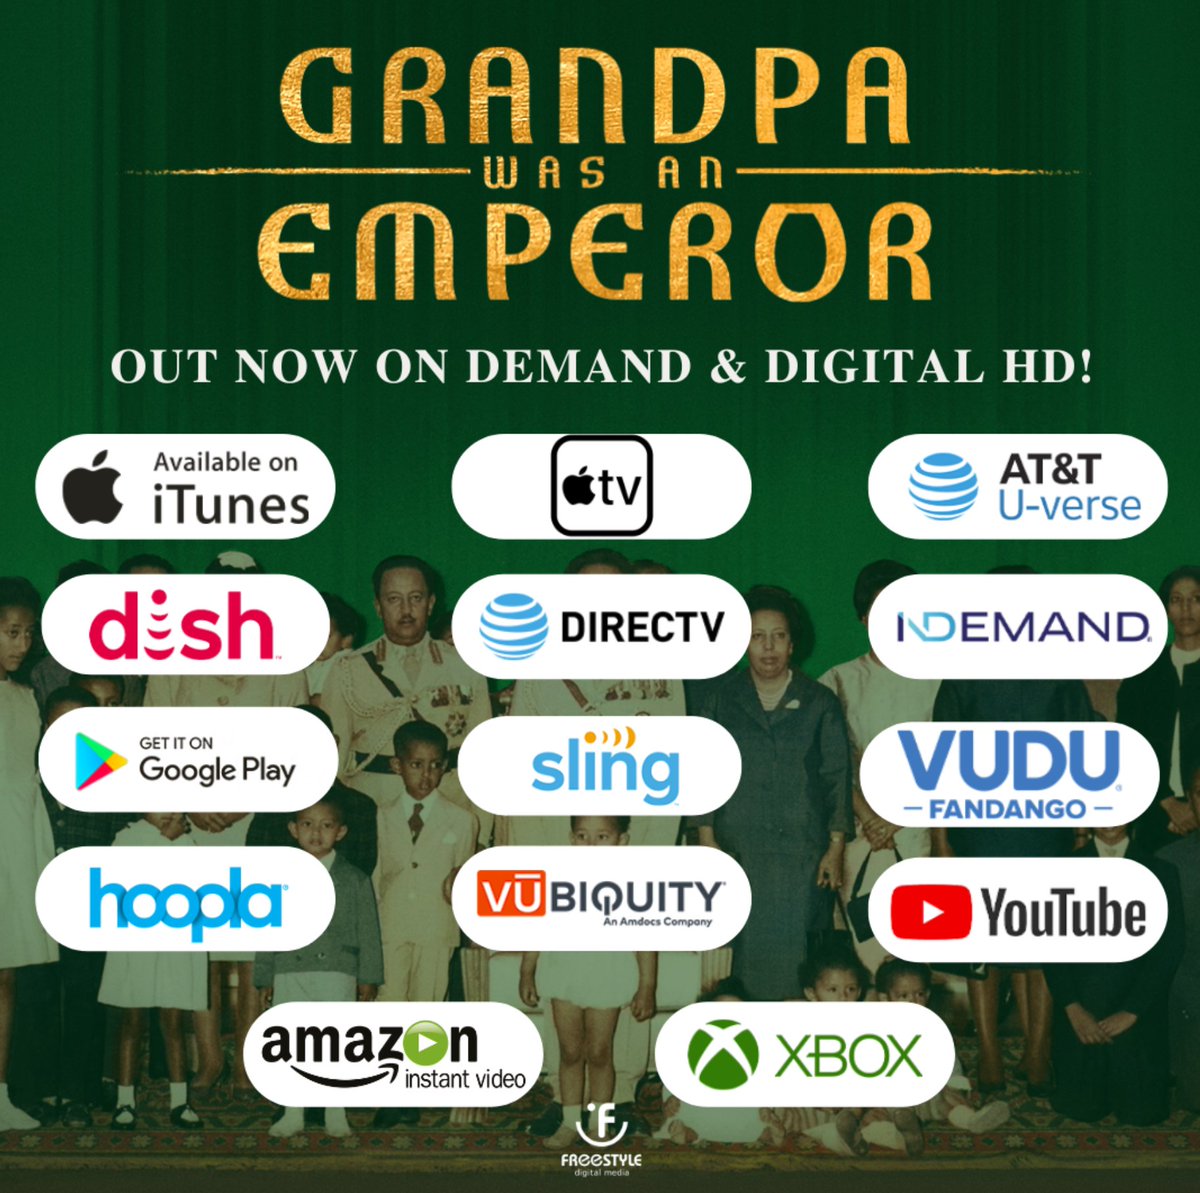 Starting today you can watch GRANDPA WAS AN EMPEROR on Apple TV, iTunes, Amazon, and many other digital platforms via @FreestyleDM. Available now at the link below!
freestyledigitalmedia.tv/film/grandpa-w…